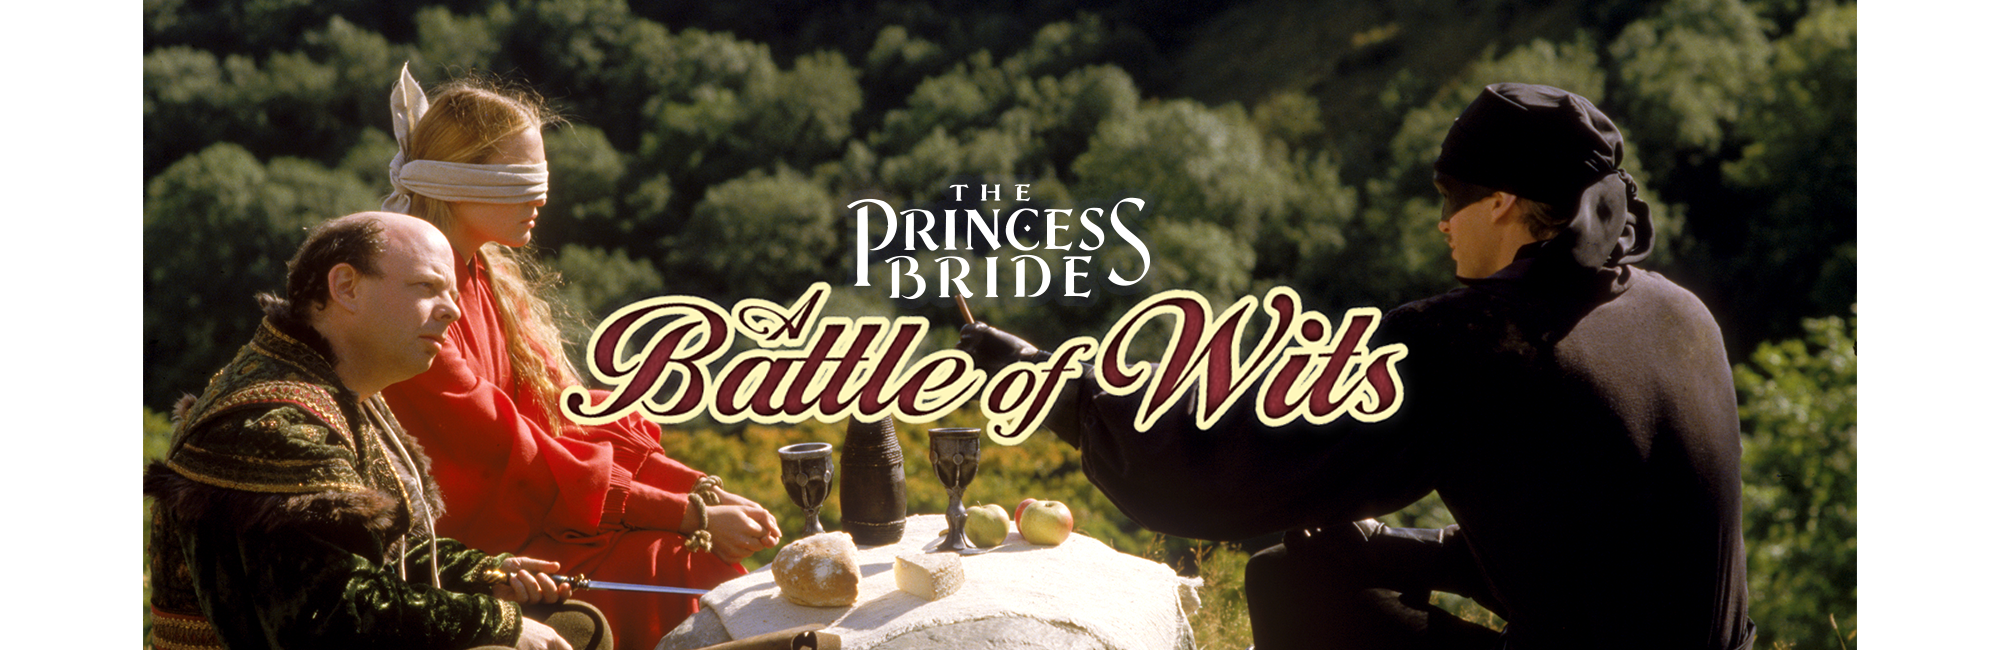 The Princess Bride A Battle of Wits card game